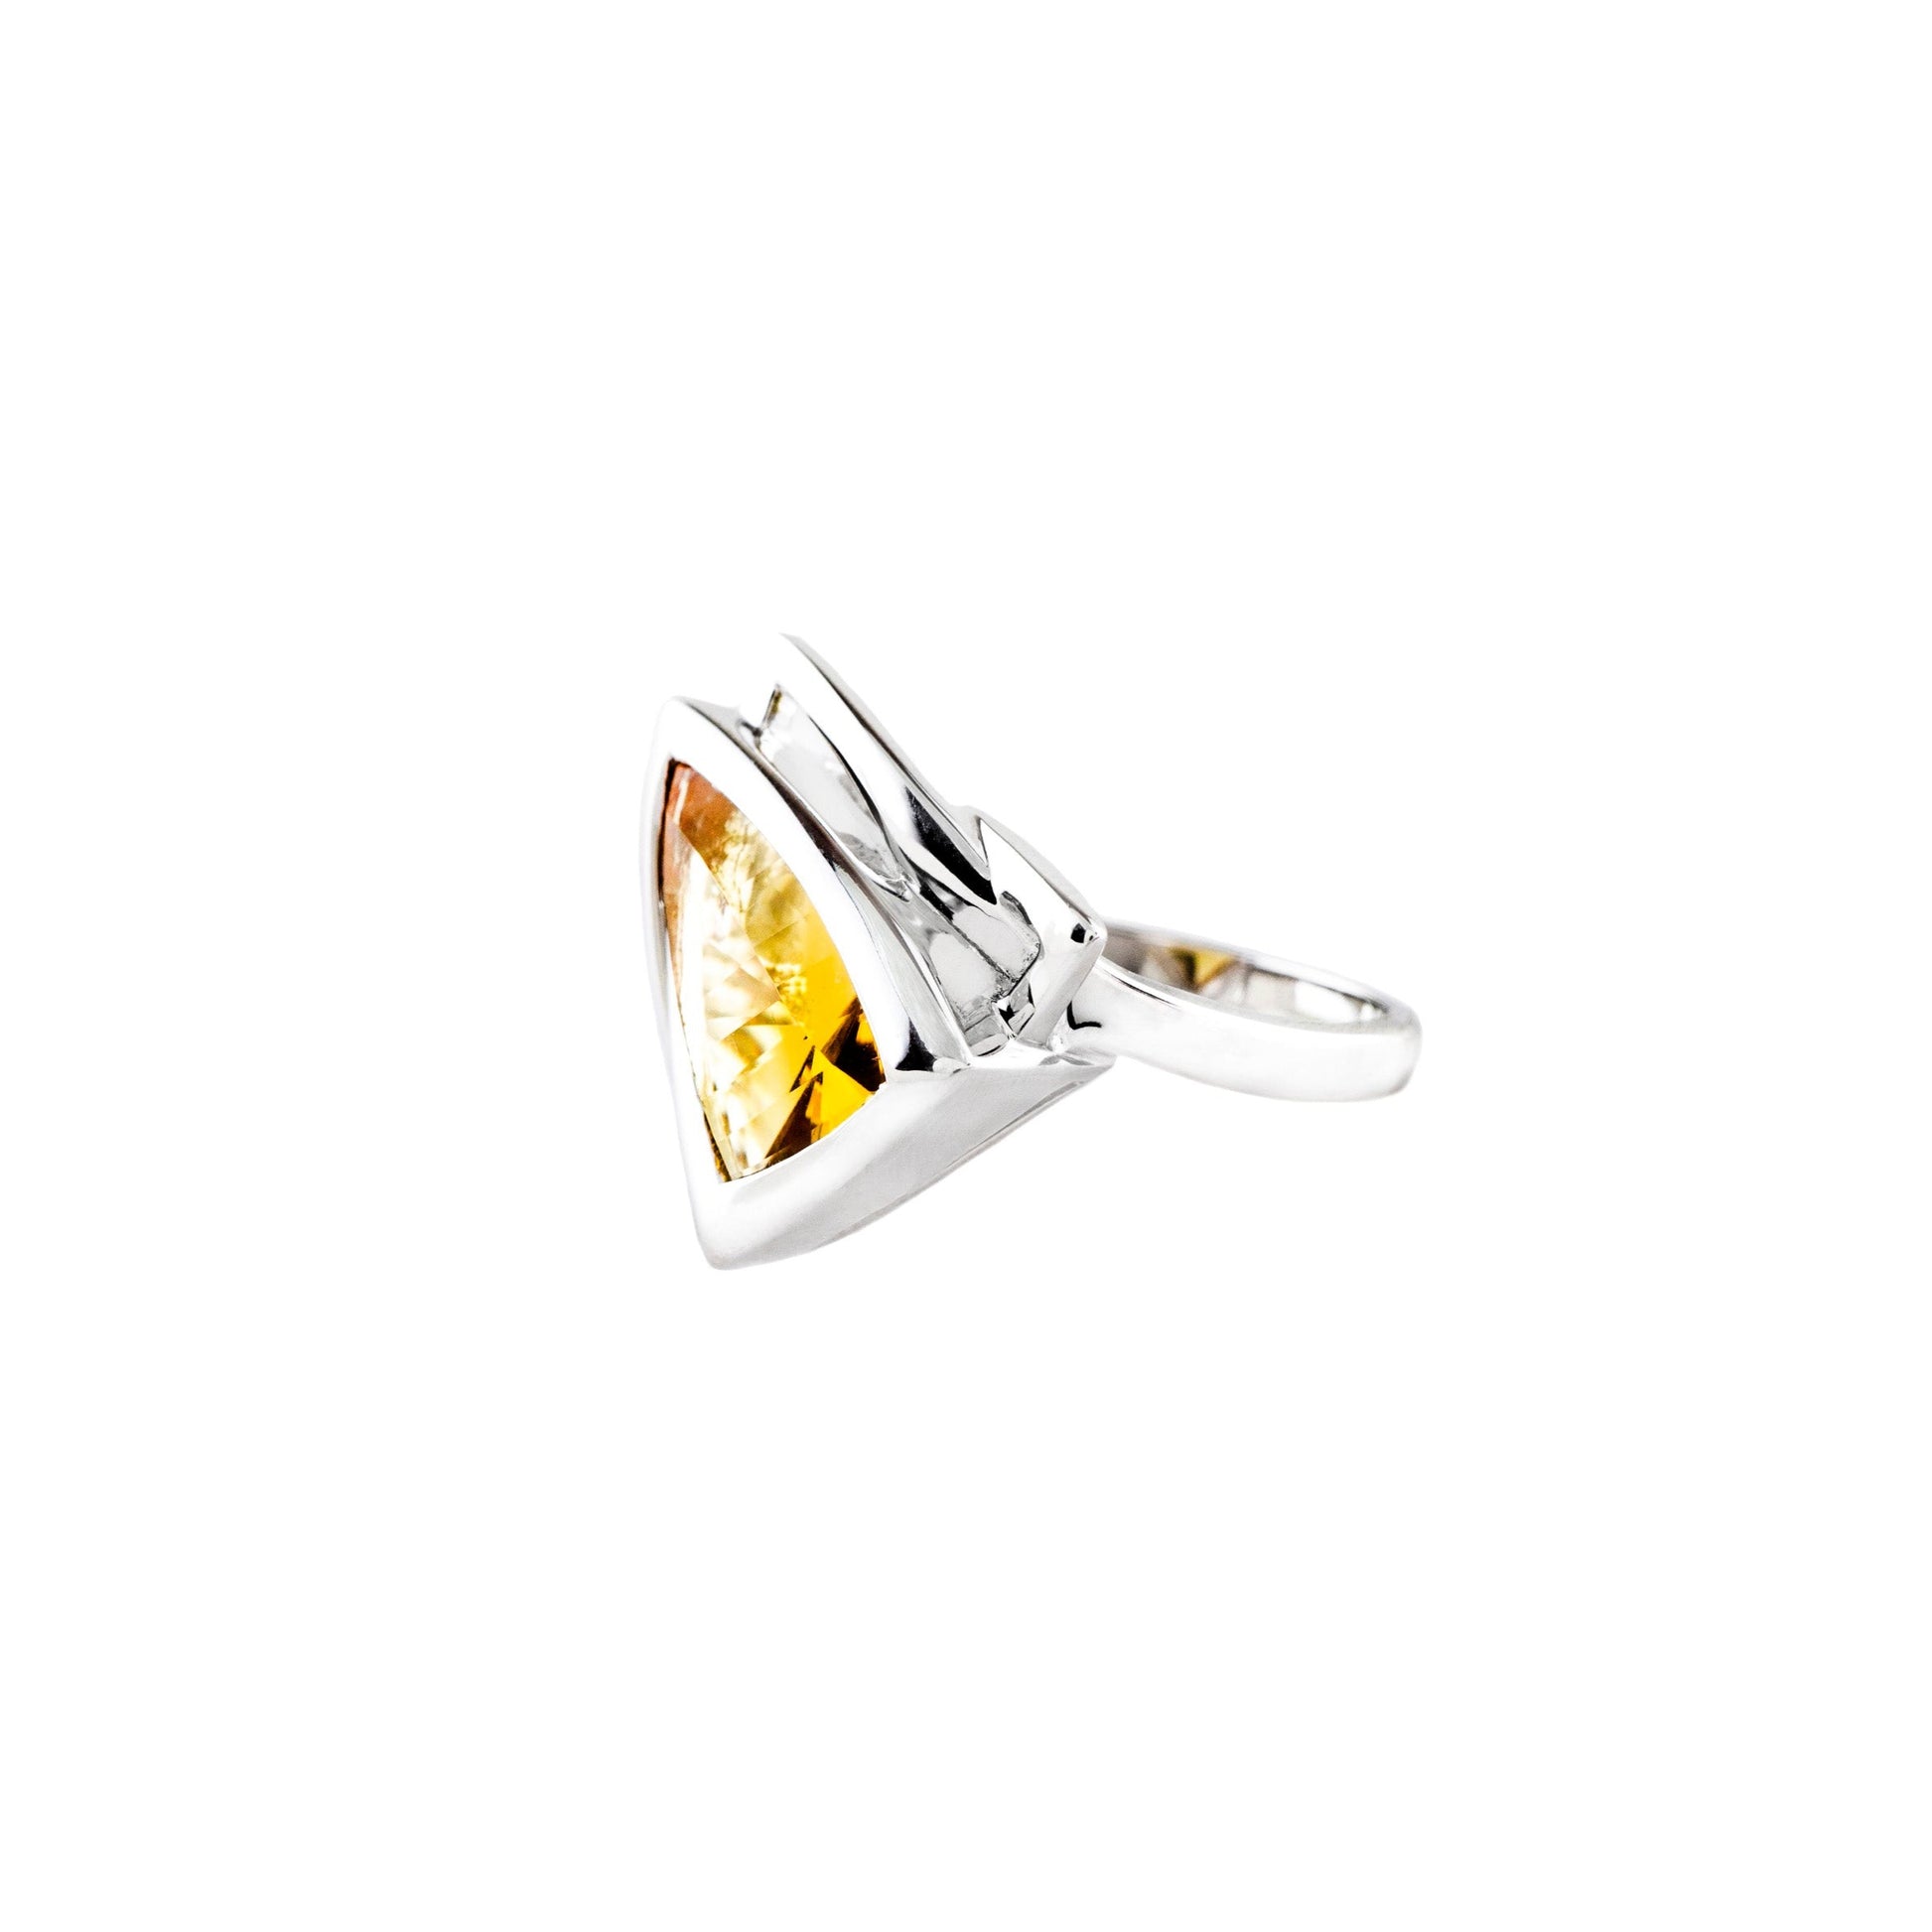 Citrine Trillion Cut Rhodium Plated Ring - Twisted Earth Artistry